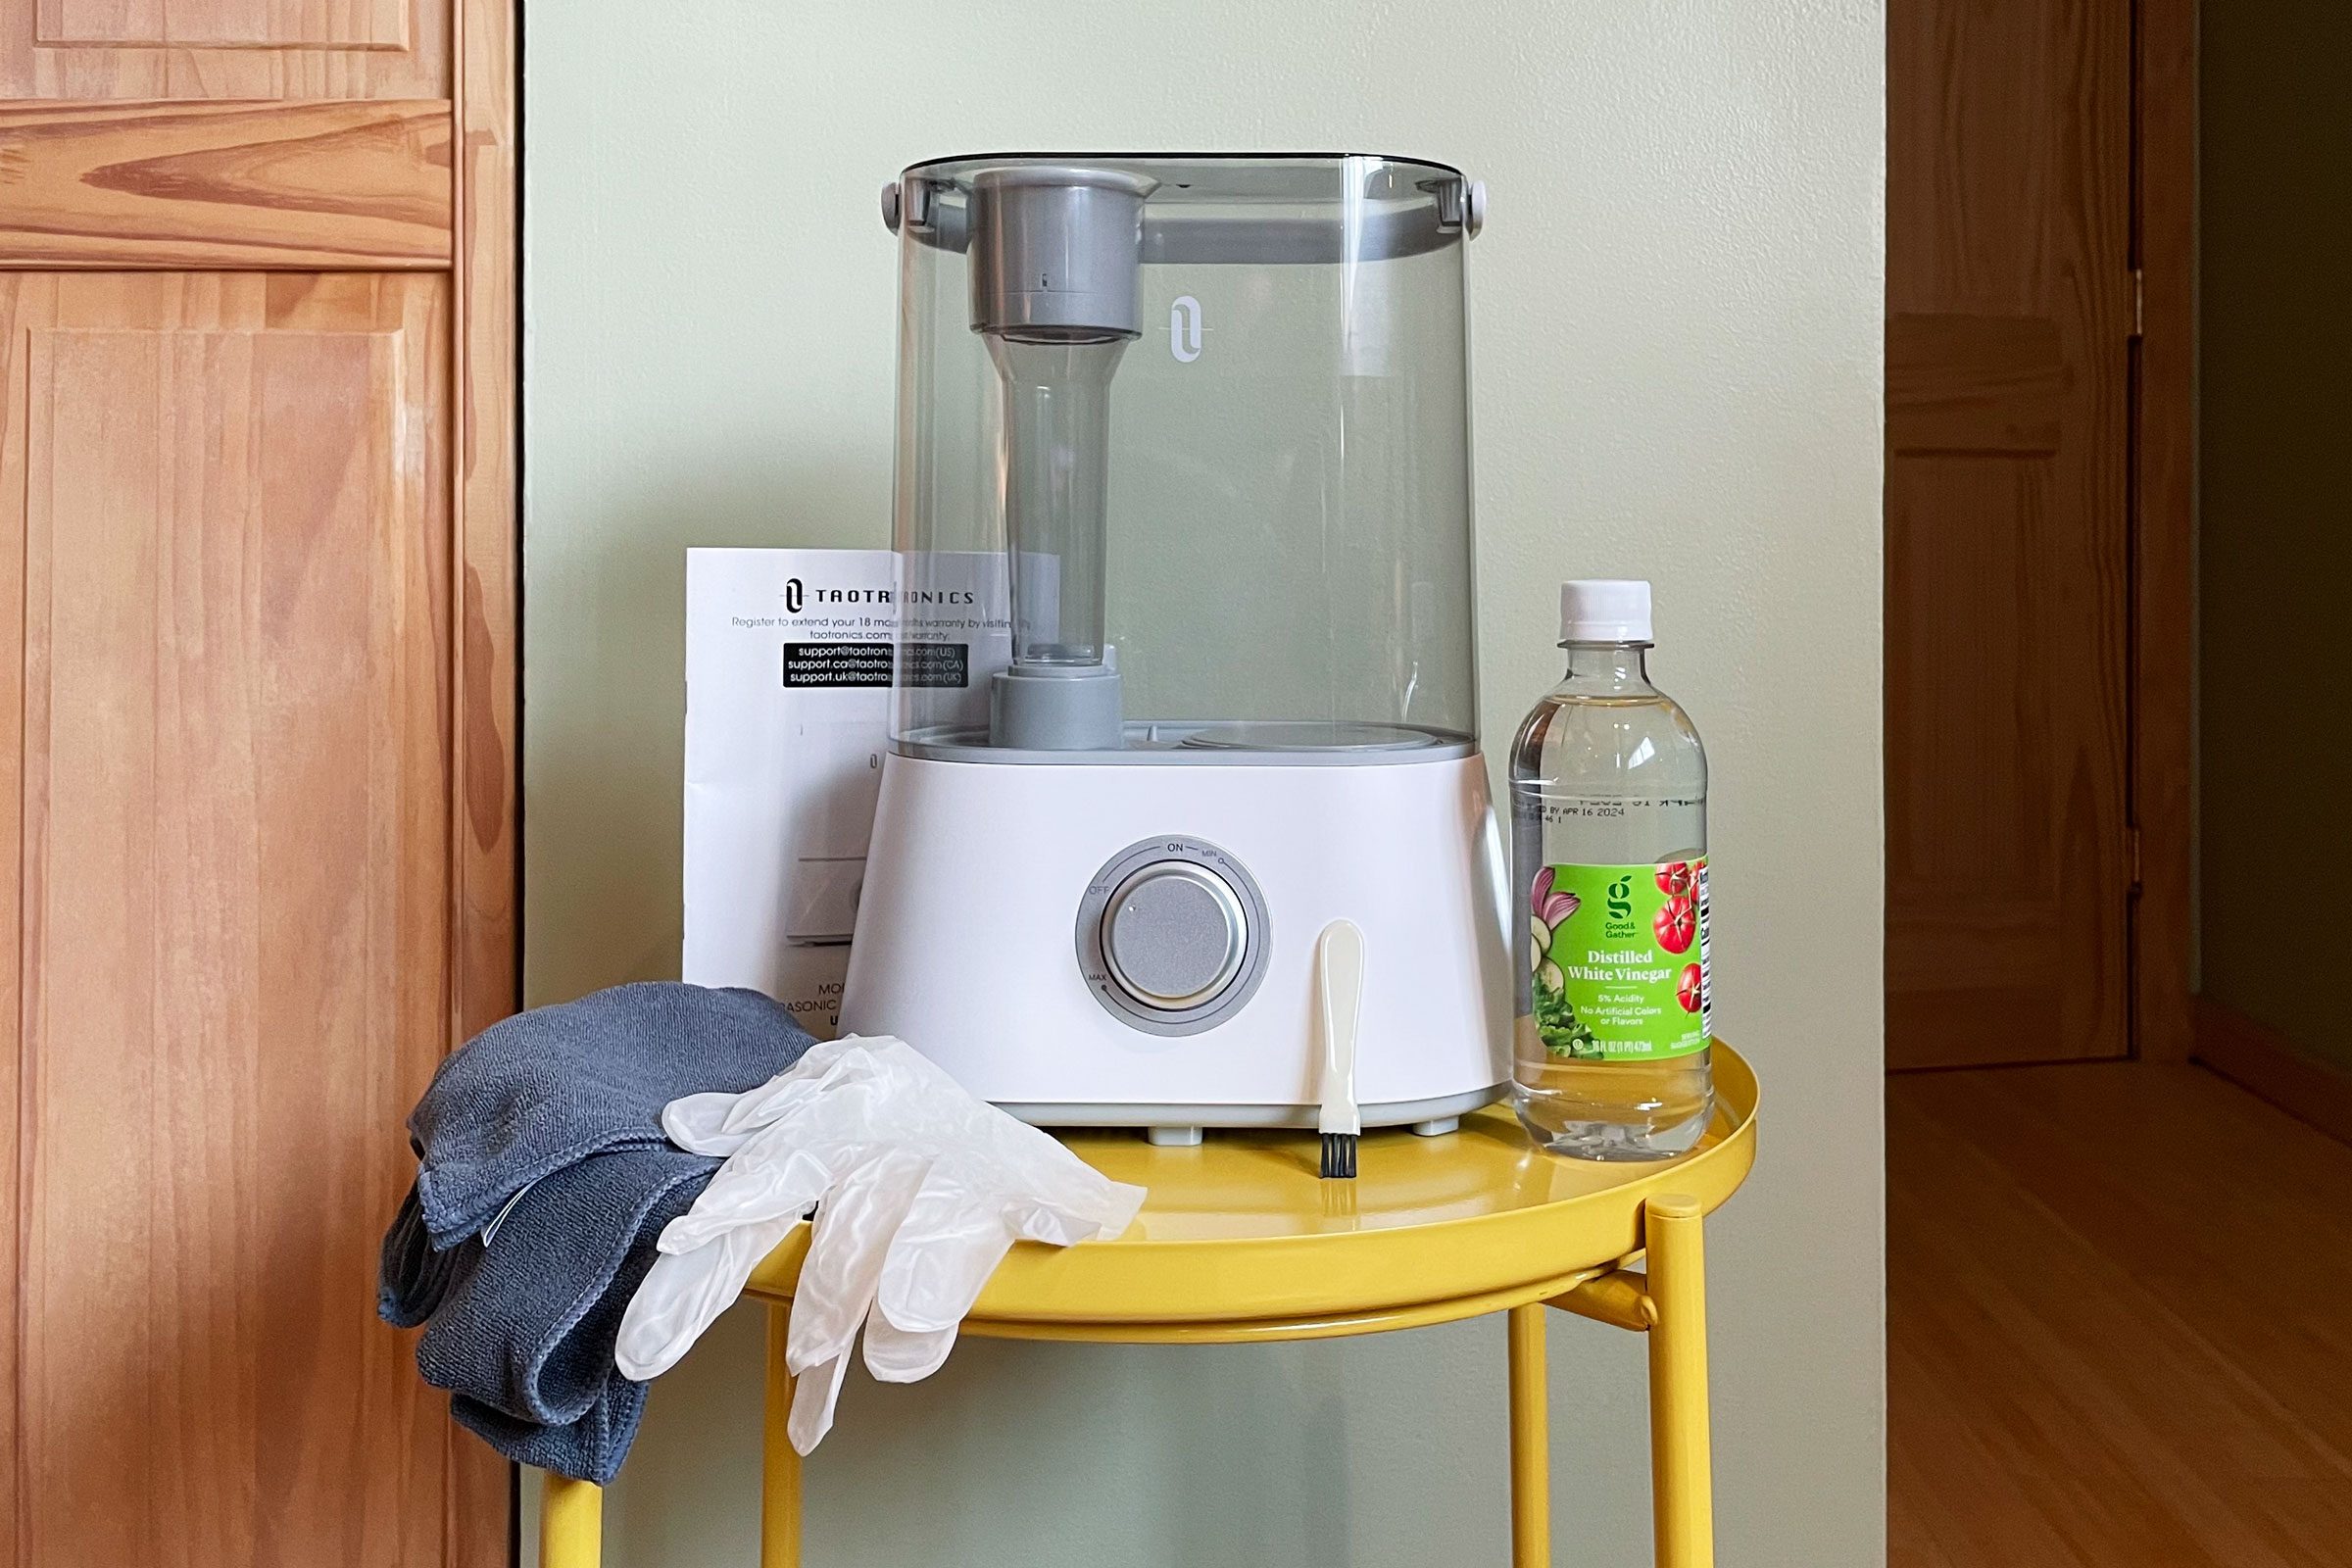 https://www.rd.com/wp-content/uploads/2021/02/20211121_cleaning-humidifier_MLander_03.jpg